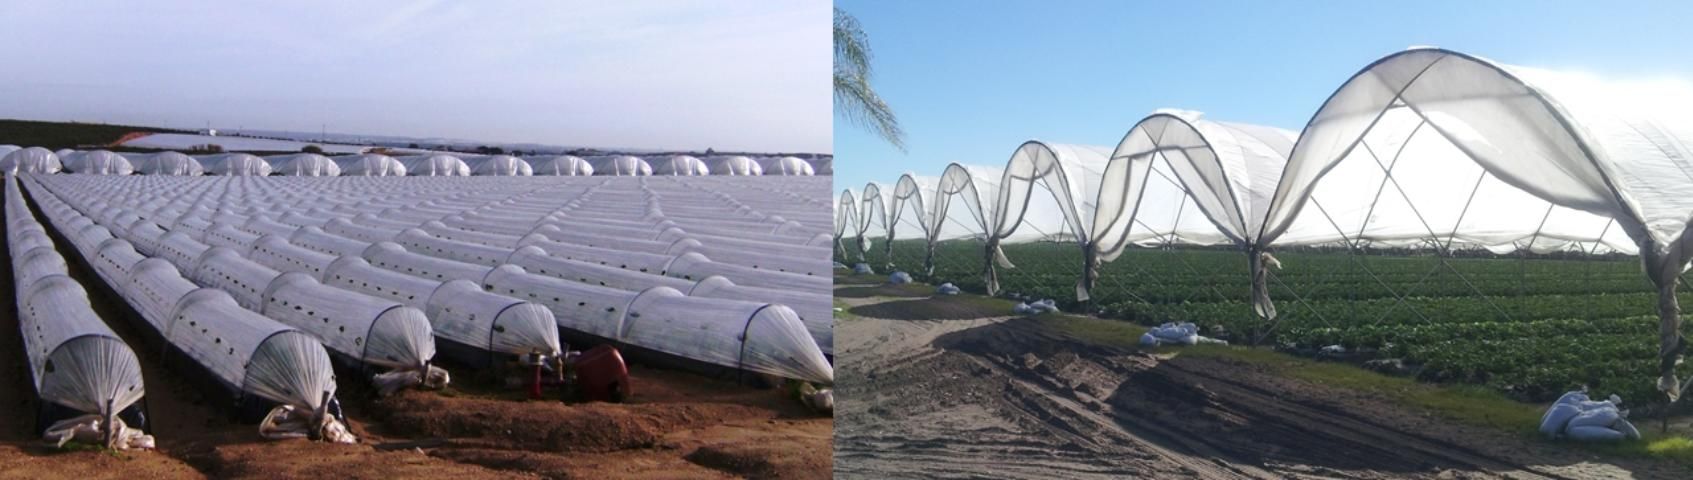 Figure 4. Low (left) and high (right) tunnels for vegetable and small fruit production.